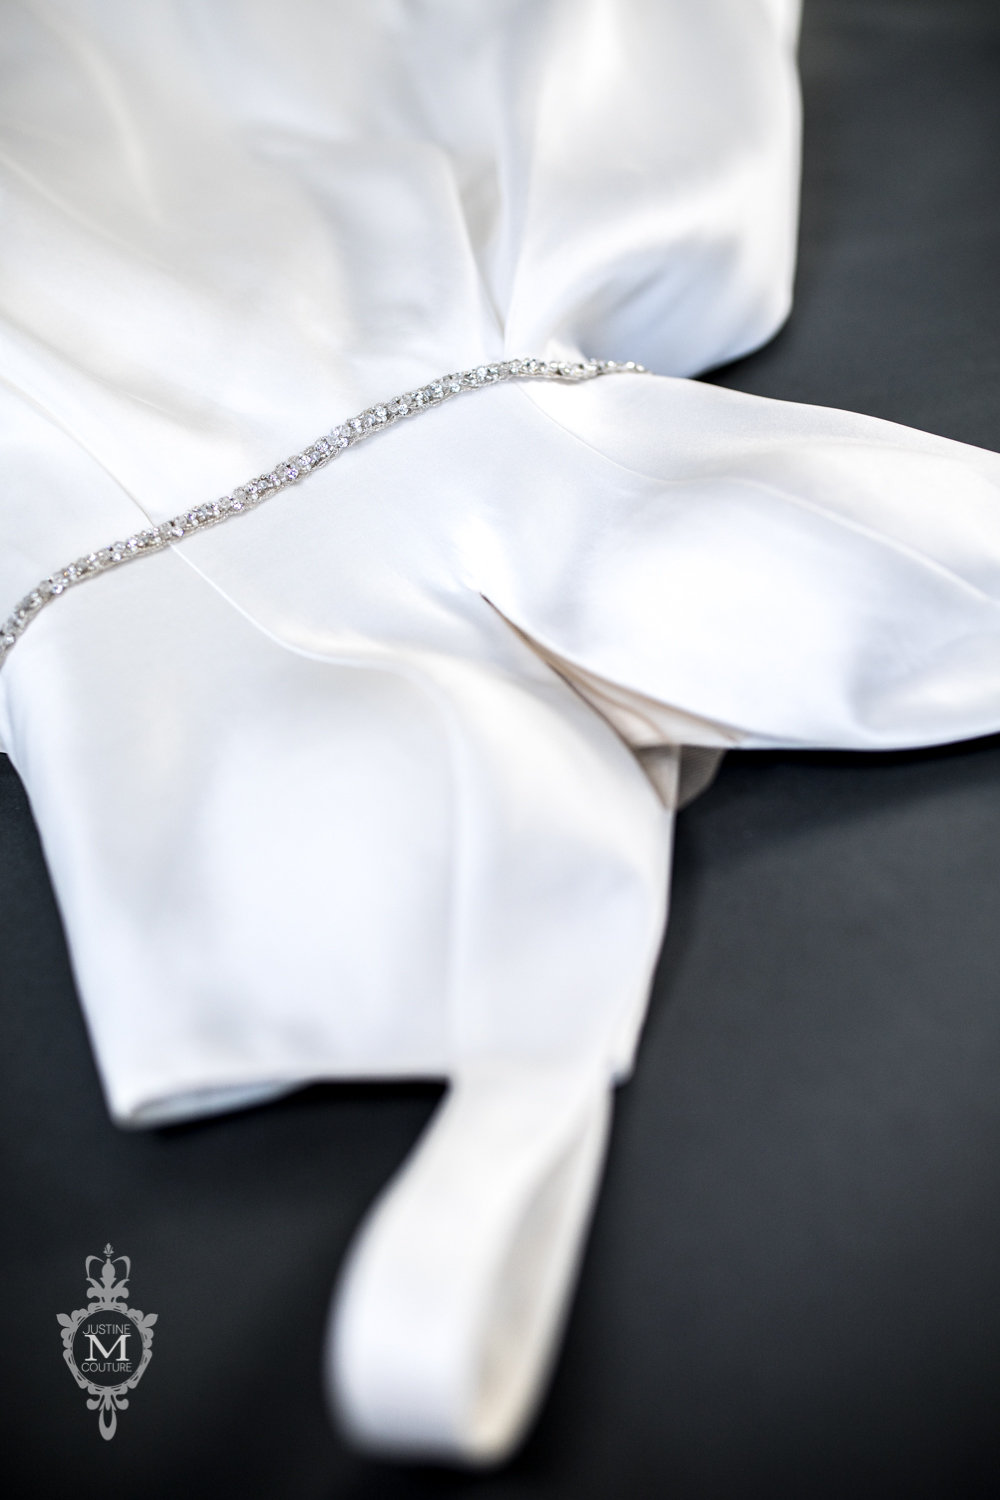 Sashes — Justine M Couture Bridal Veils, Jewelry and Accessories